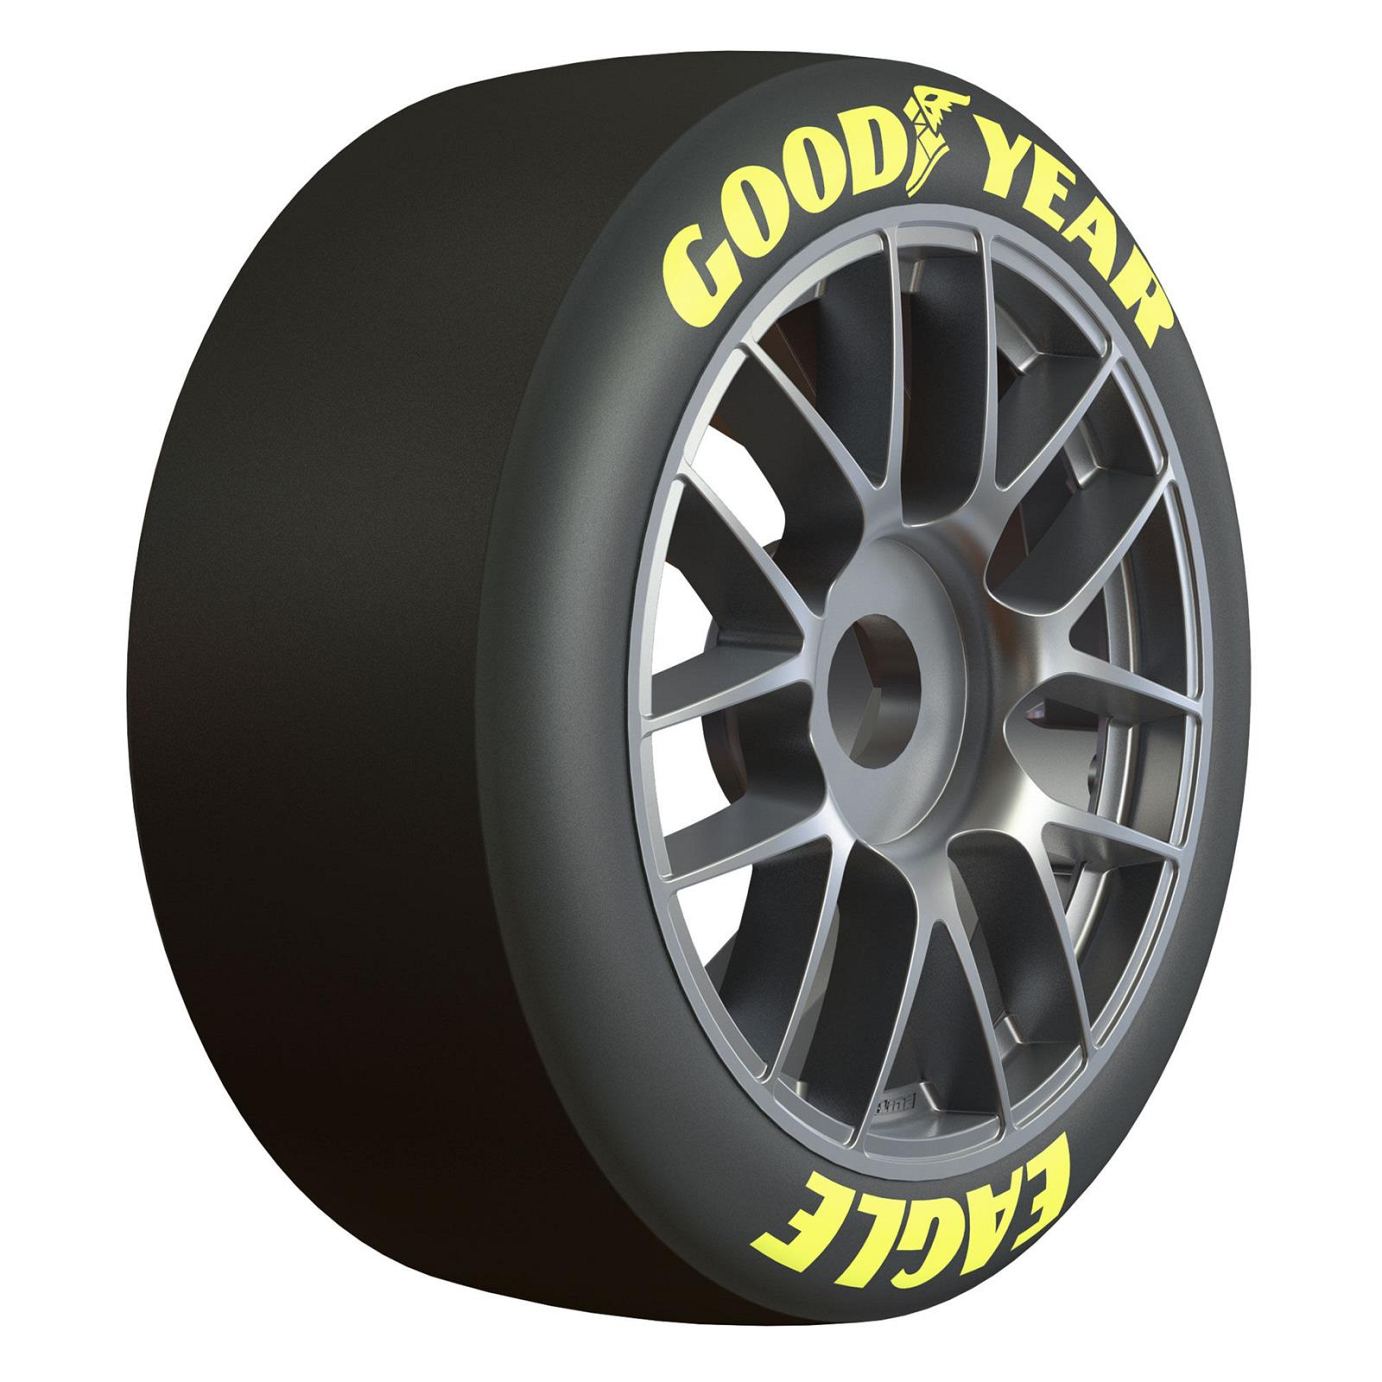 Proline 1/7 Goodyear Nascar Cup Belted Tyres Mounted on 14 Spoke Wheels